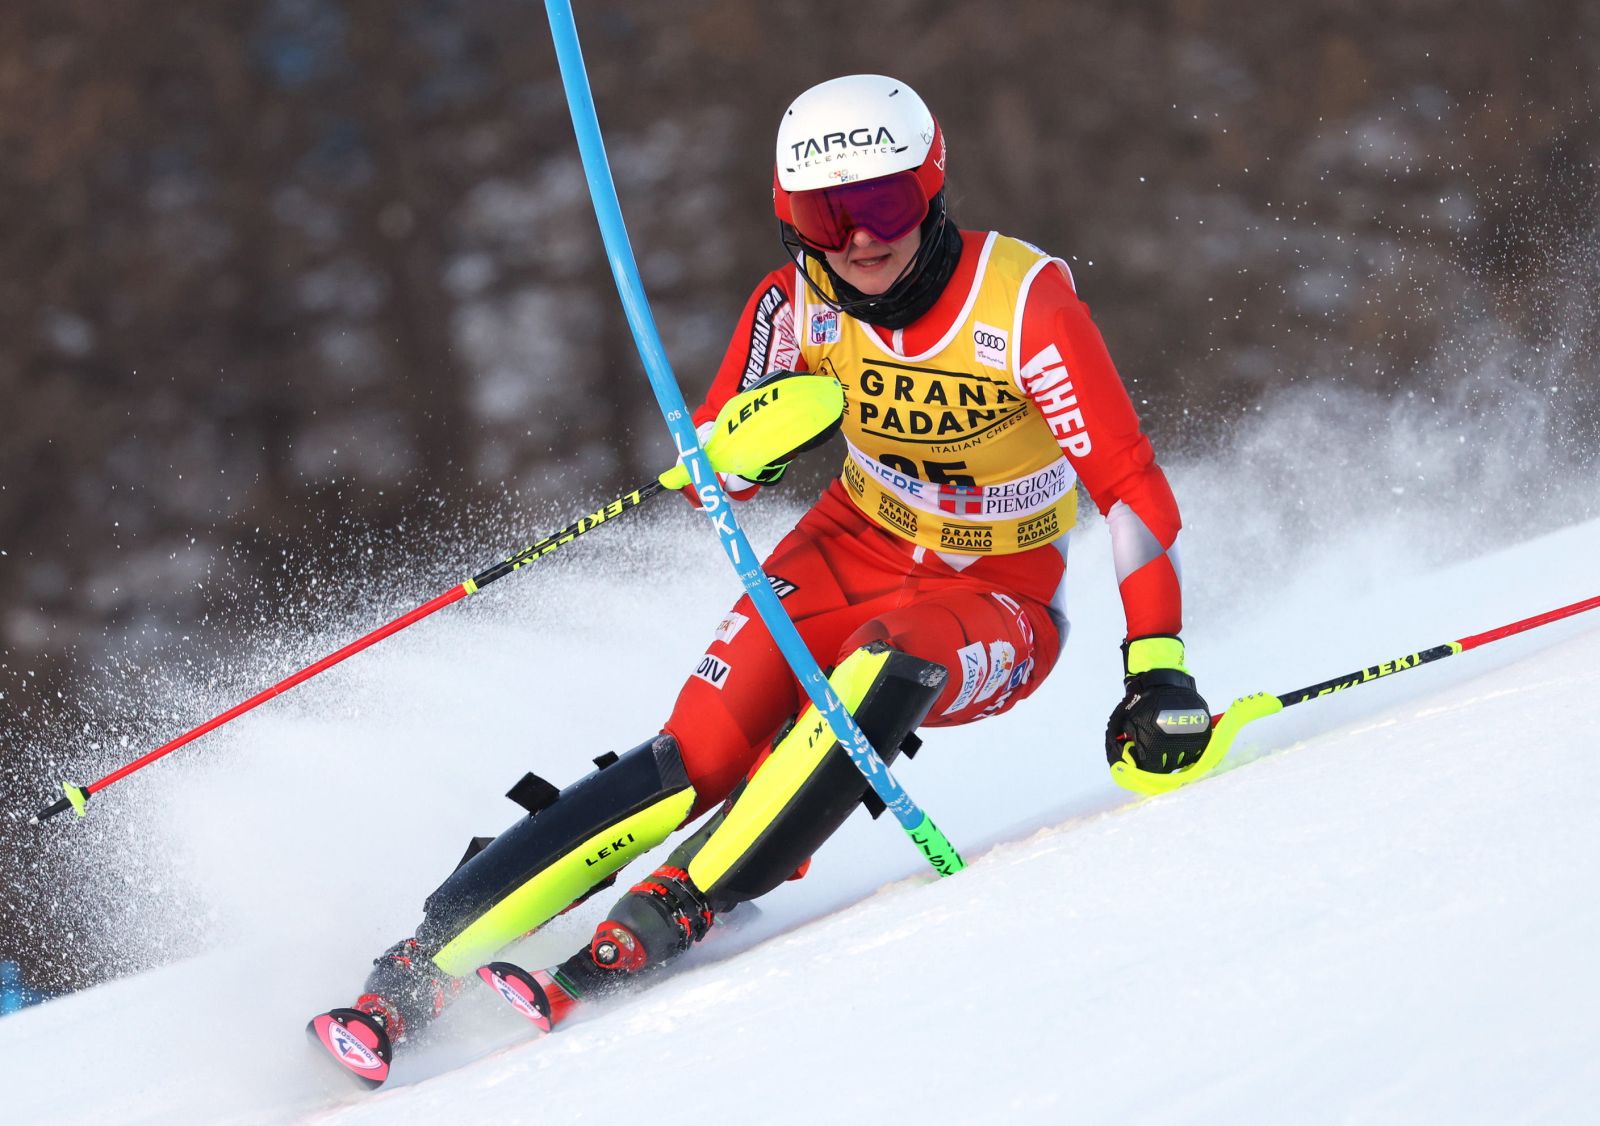 epa10360825 Zrinka Ljutic of Croatia clears a gate during the first run of the Women's Slalom race at the FIS Alpine Skiing World Cup in Sestriere, Italy, 11 December 2022.  EPA/ANDREA SOLERO